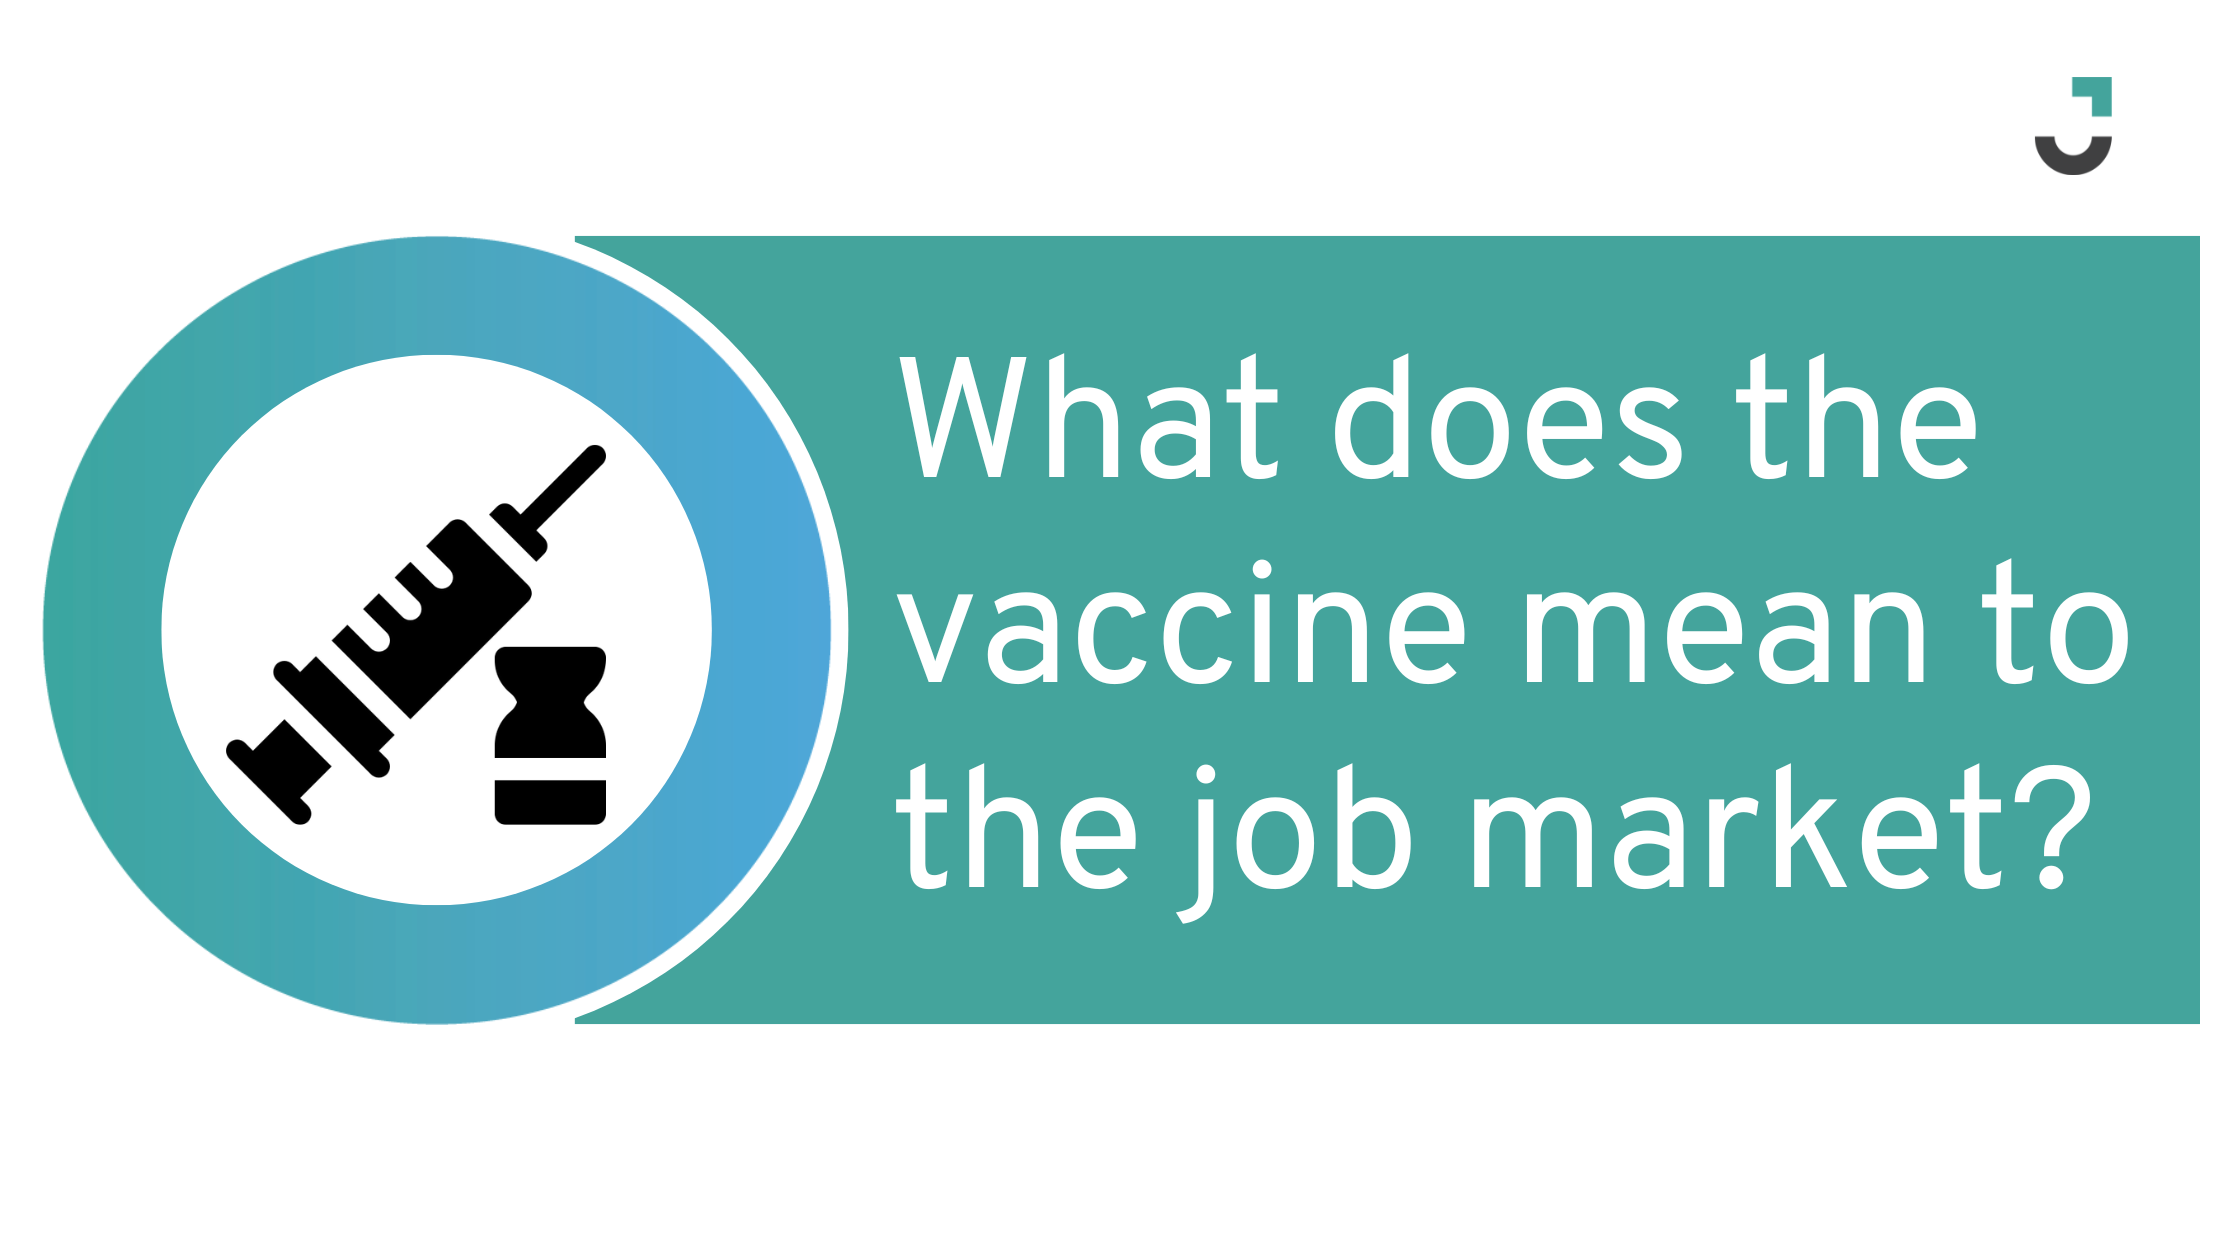 What does the vaccine mean to the job market?